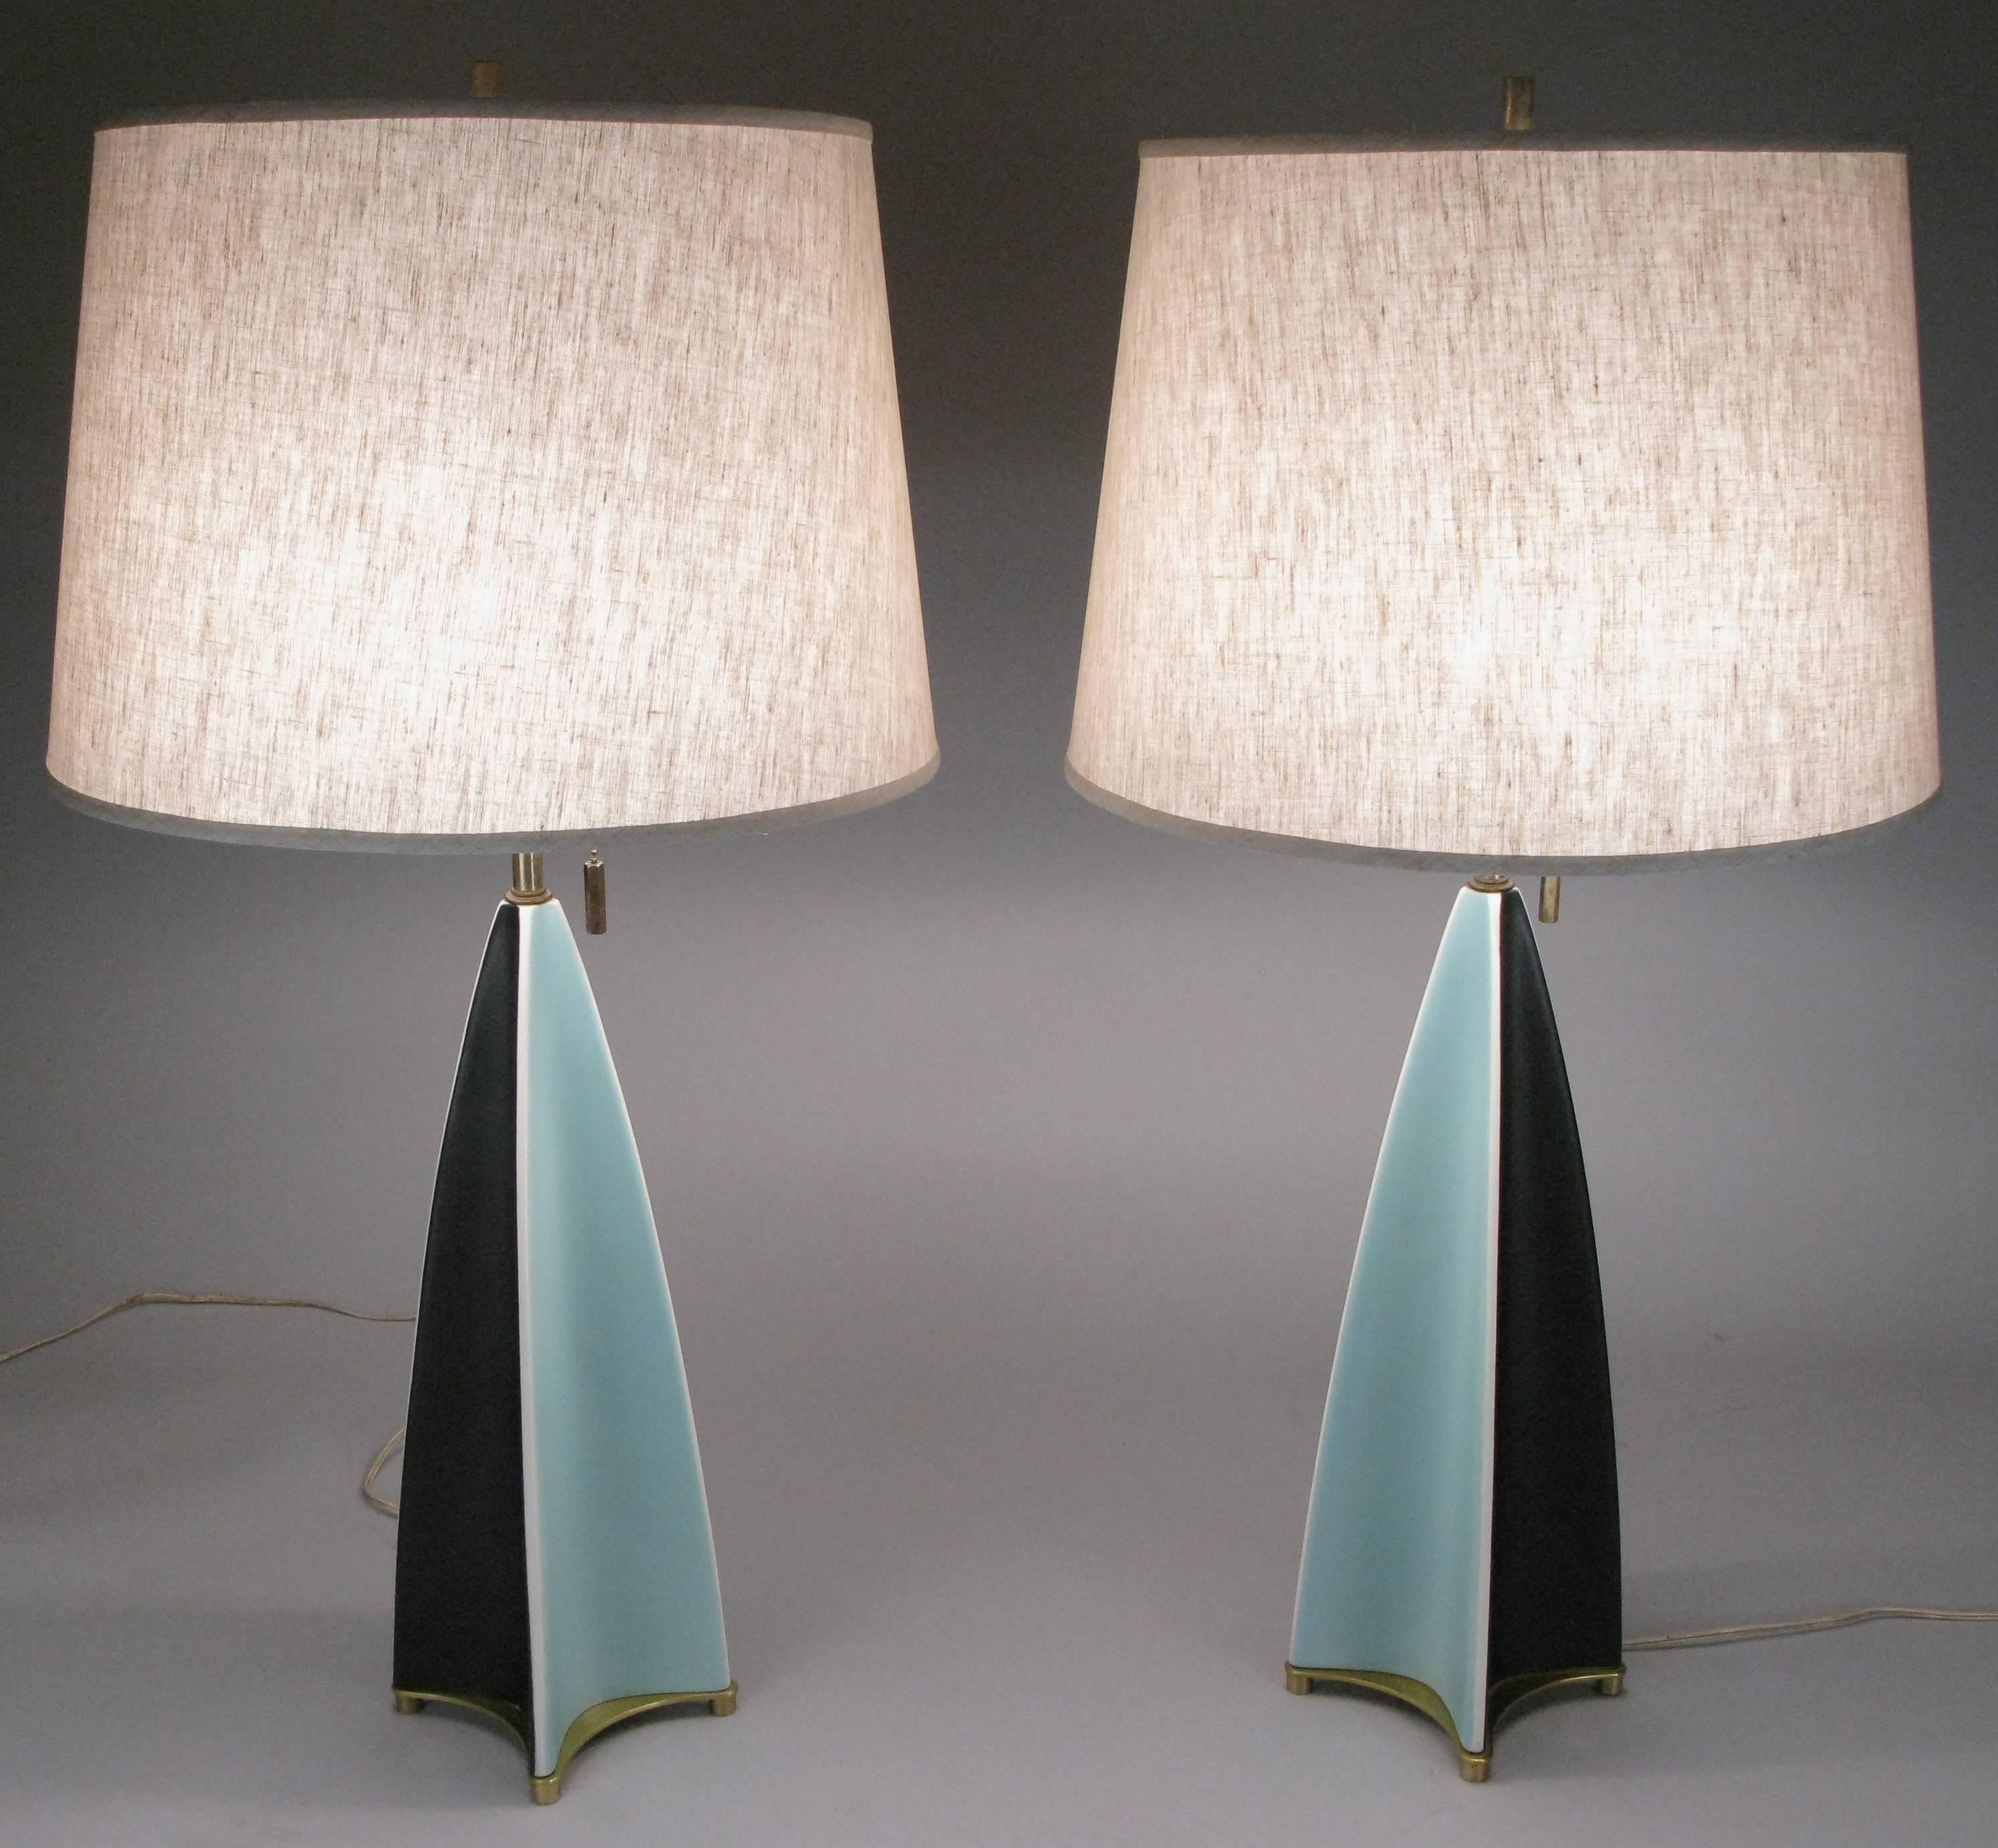 American Pair of Vintage 1950s Ceramic Lamps by Gerald Thurston for Lightolier